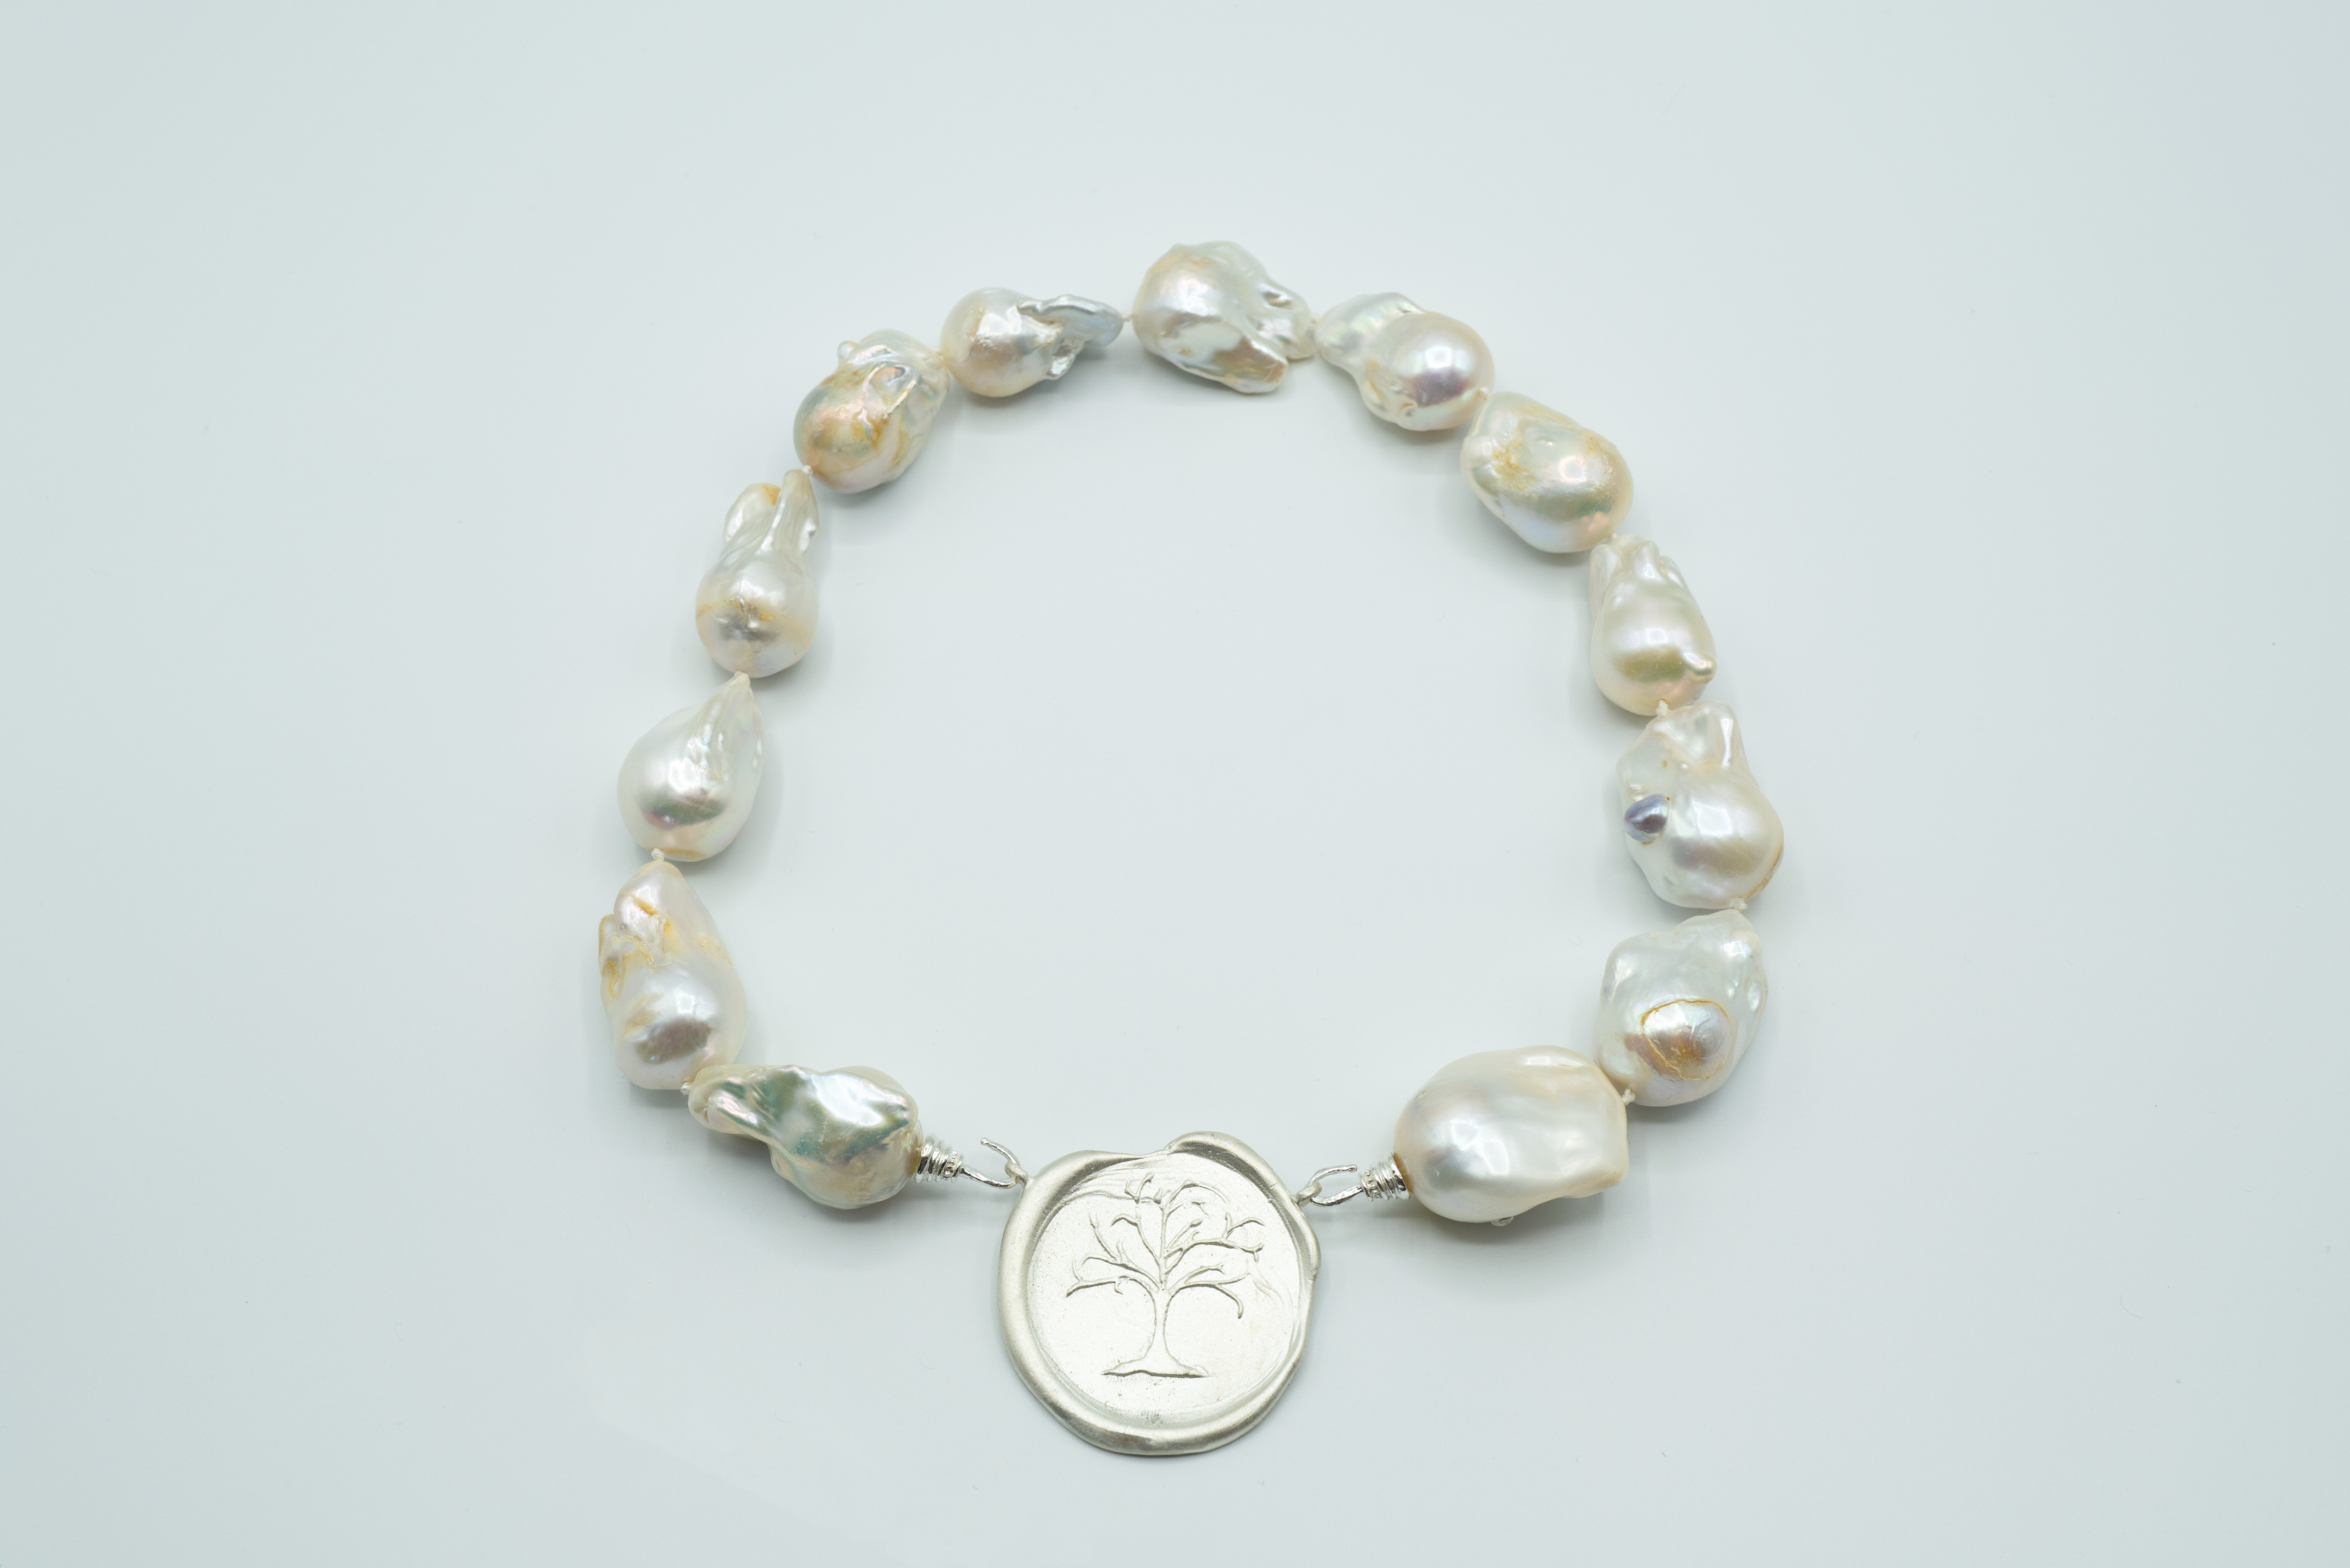 Giant Freshwater Baroque Pearls on Sterling Hand Cast Hooks, Knotted Individually on Silk